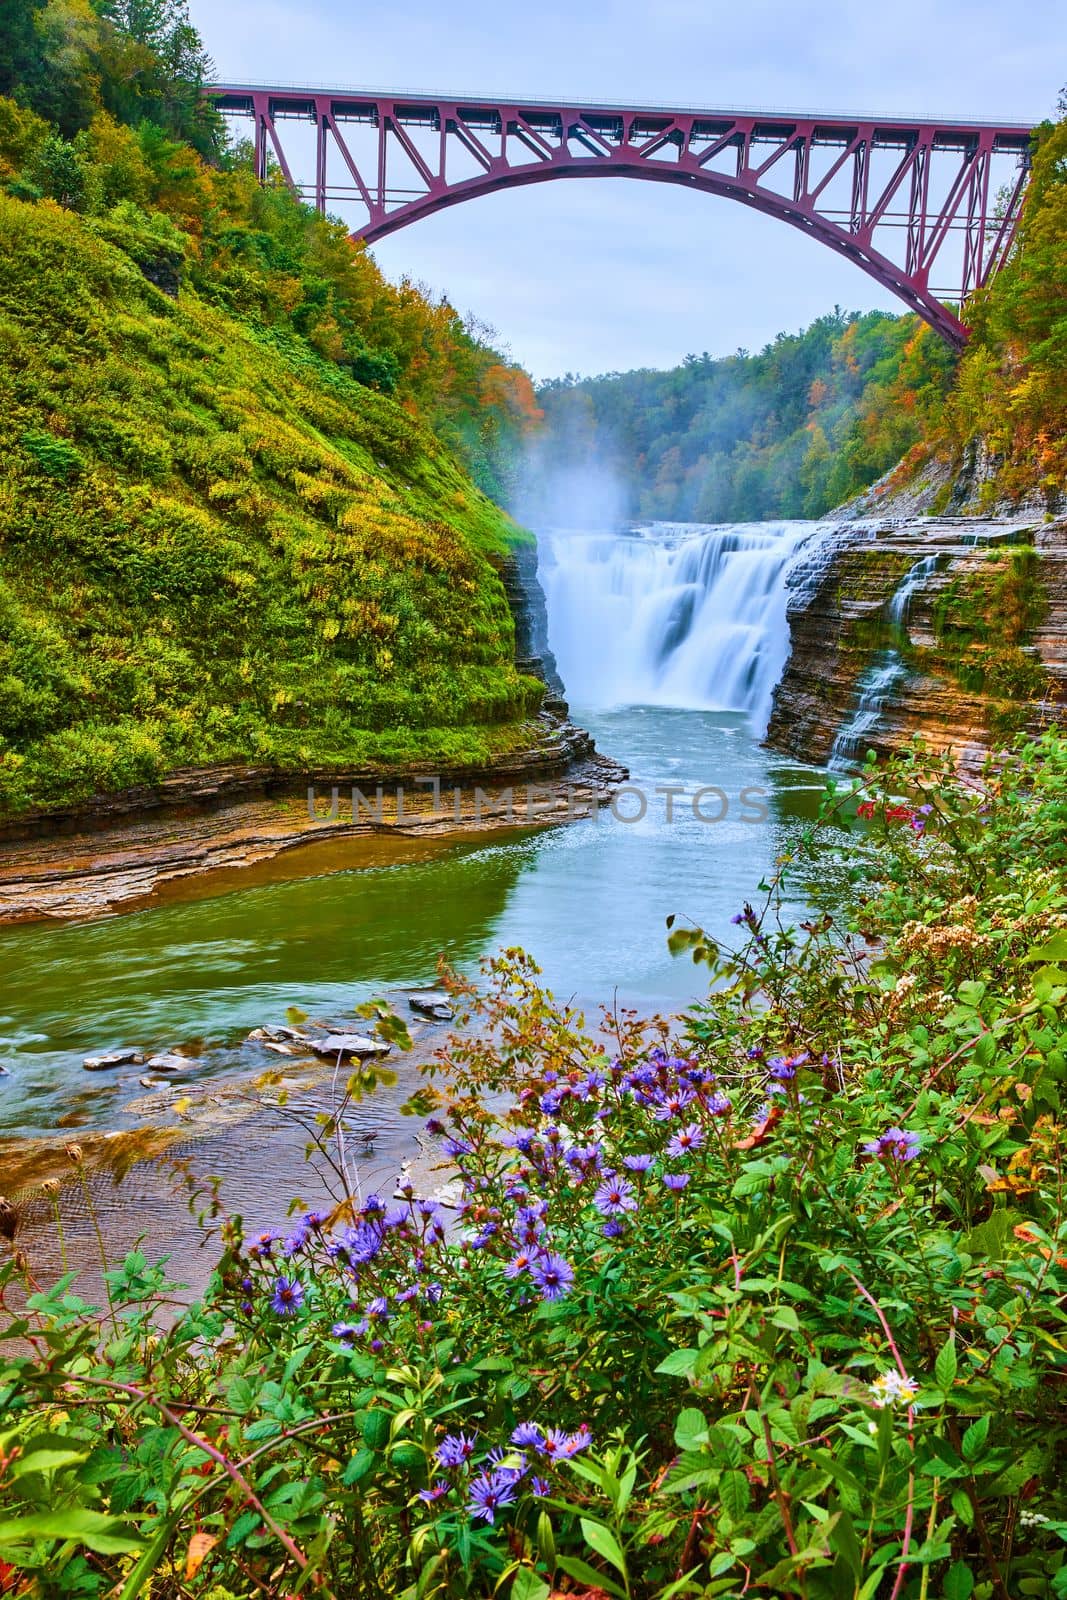 Image of Stunning waterfall in gorge with arched train track bridge above and purple field flowers in front